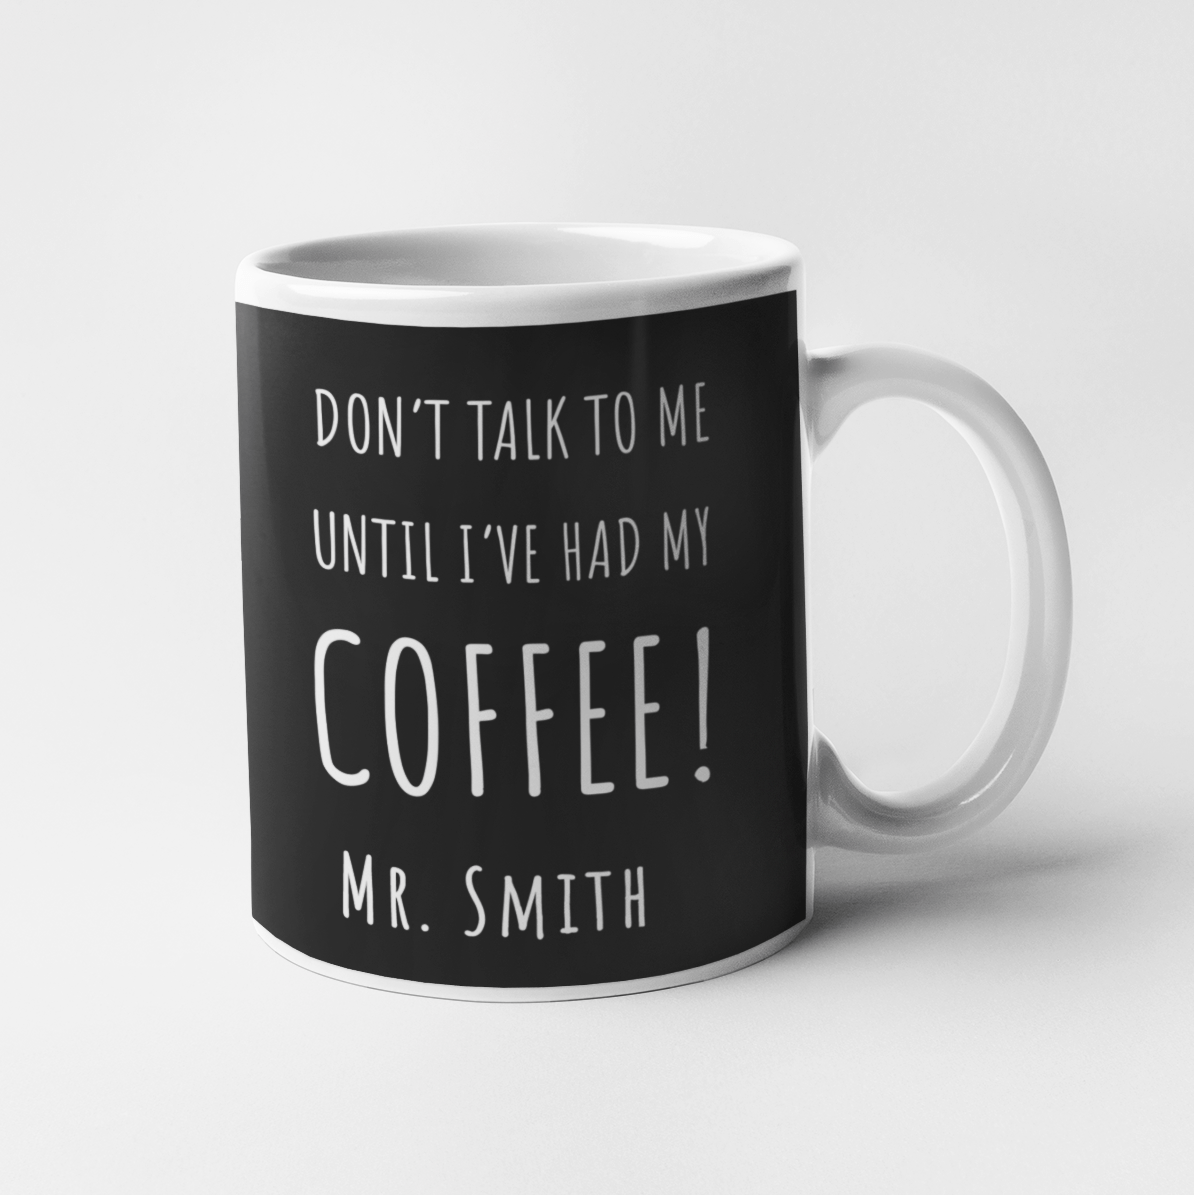 Don't talk to me until i've had my coffee! Personalised Mug